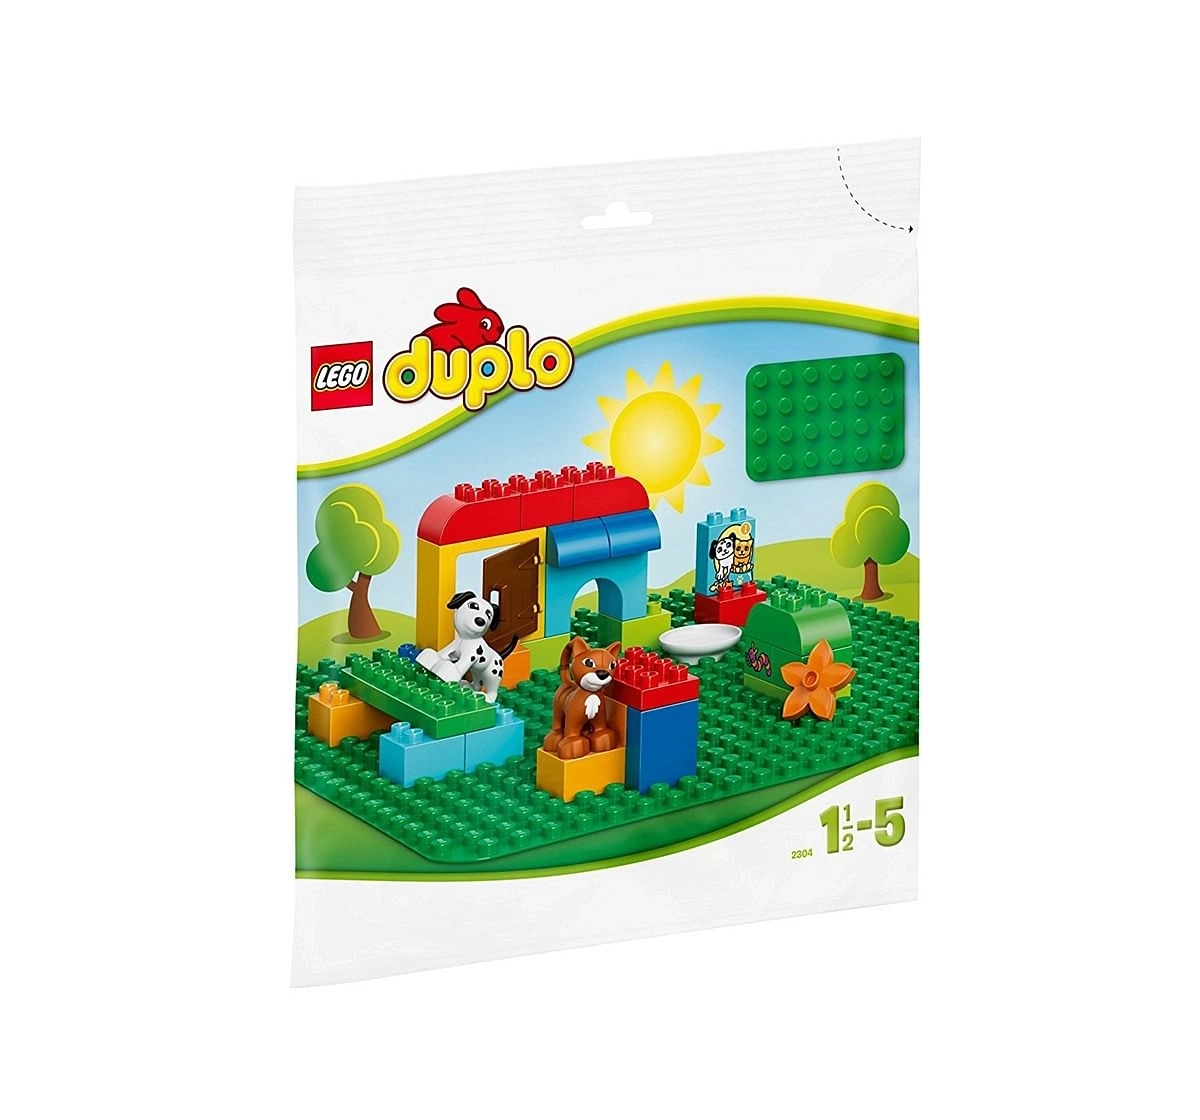 Lego Duplo Large  Building Plate 1.5 To 5 Years 2304  Blocks for Kids age 4Y+ (Green)